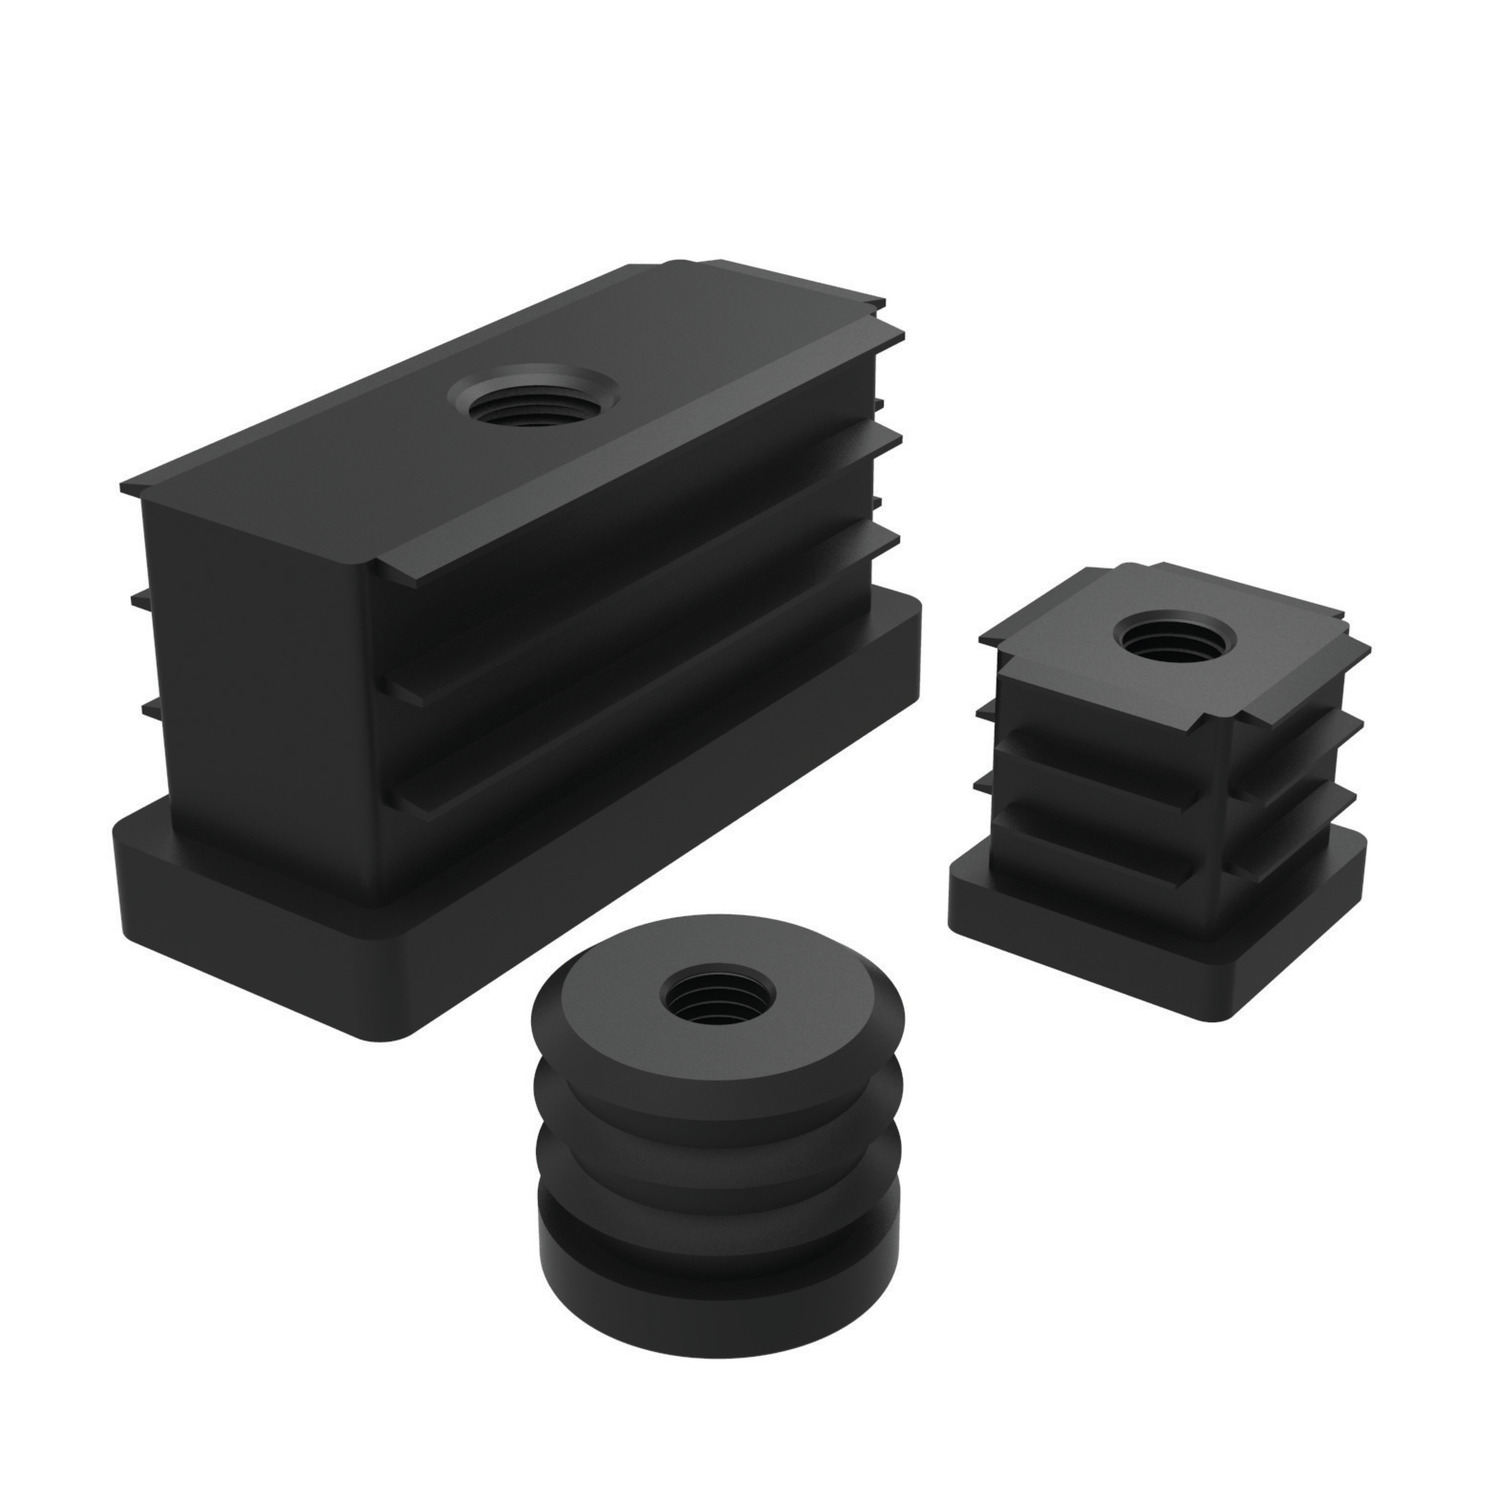 34680.W0018 Thrd. Plastic Inserts for Hollow Section Thermoplastic - Square - 18x18 - M10